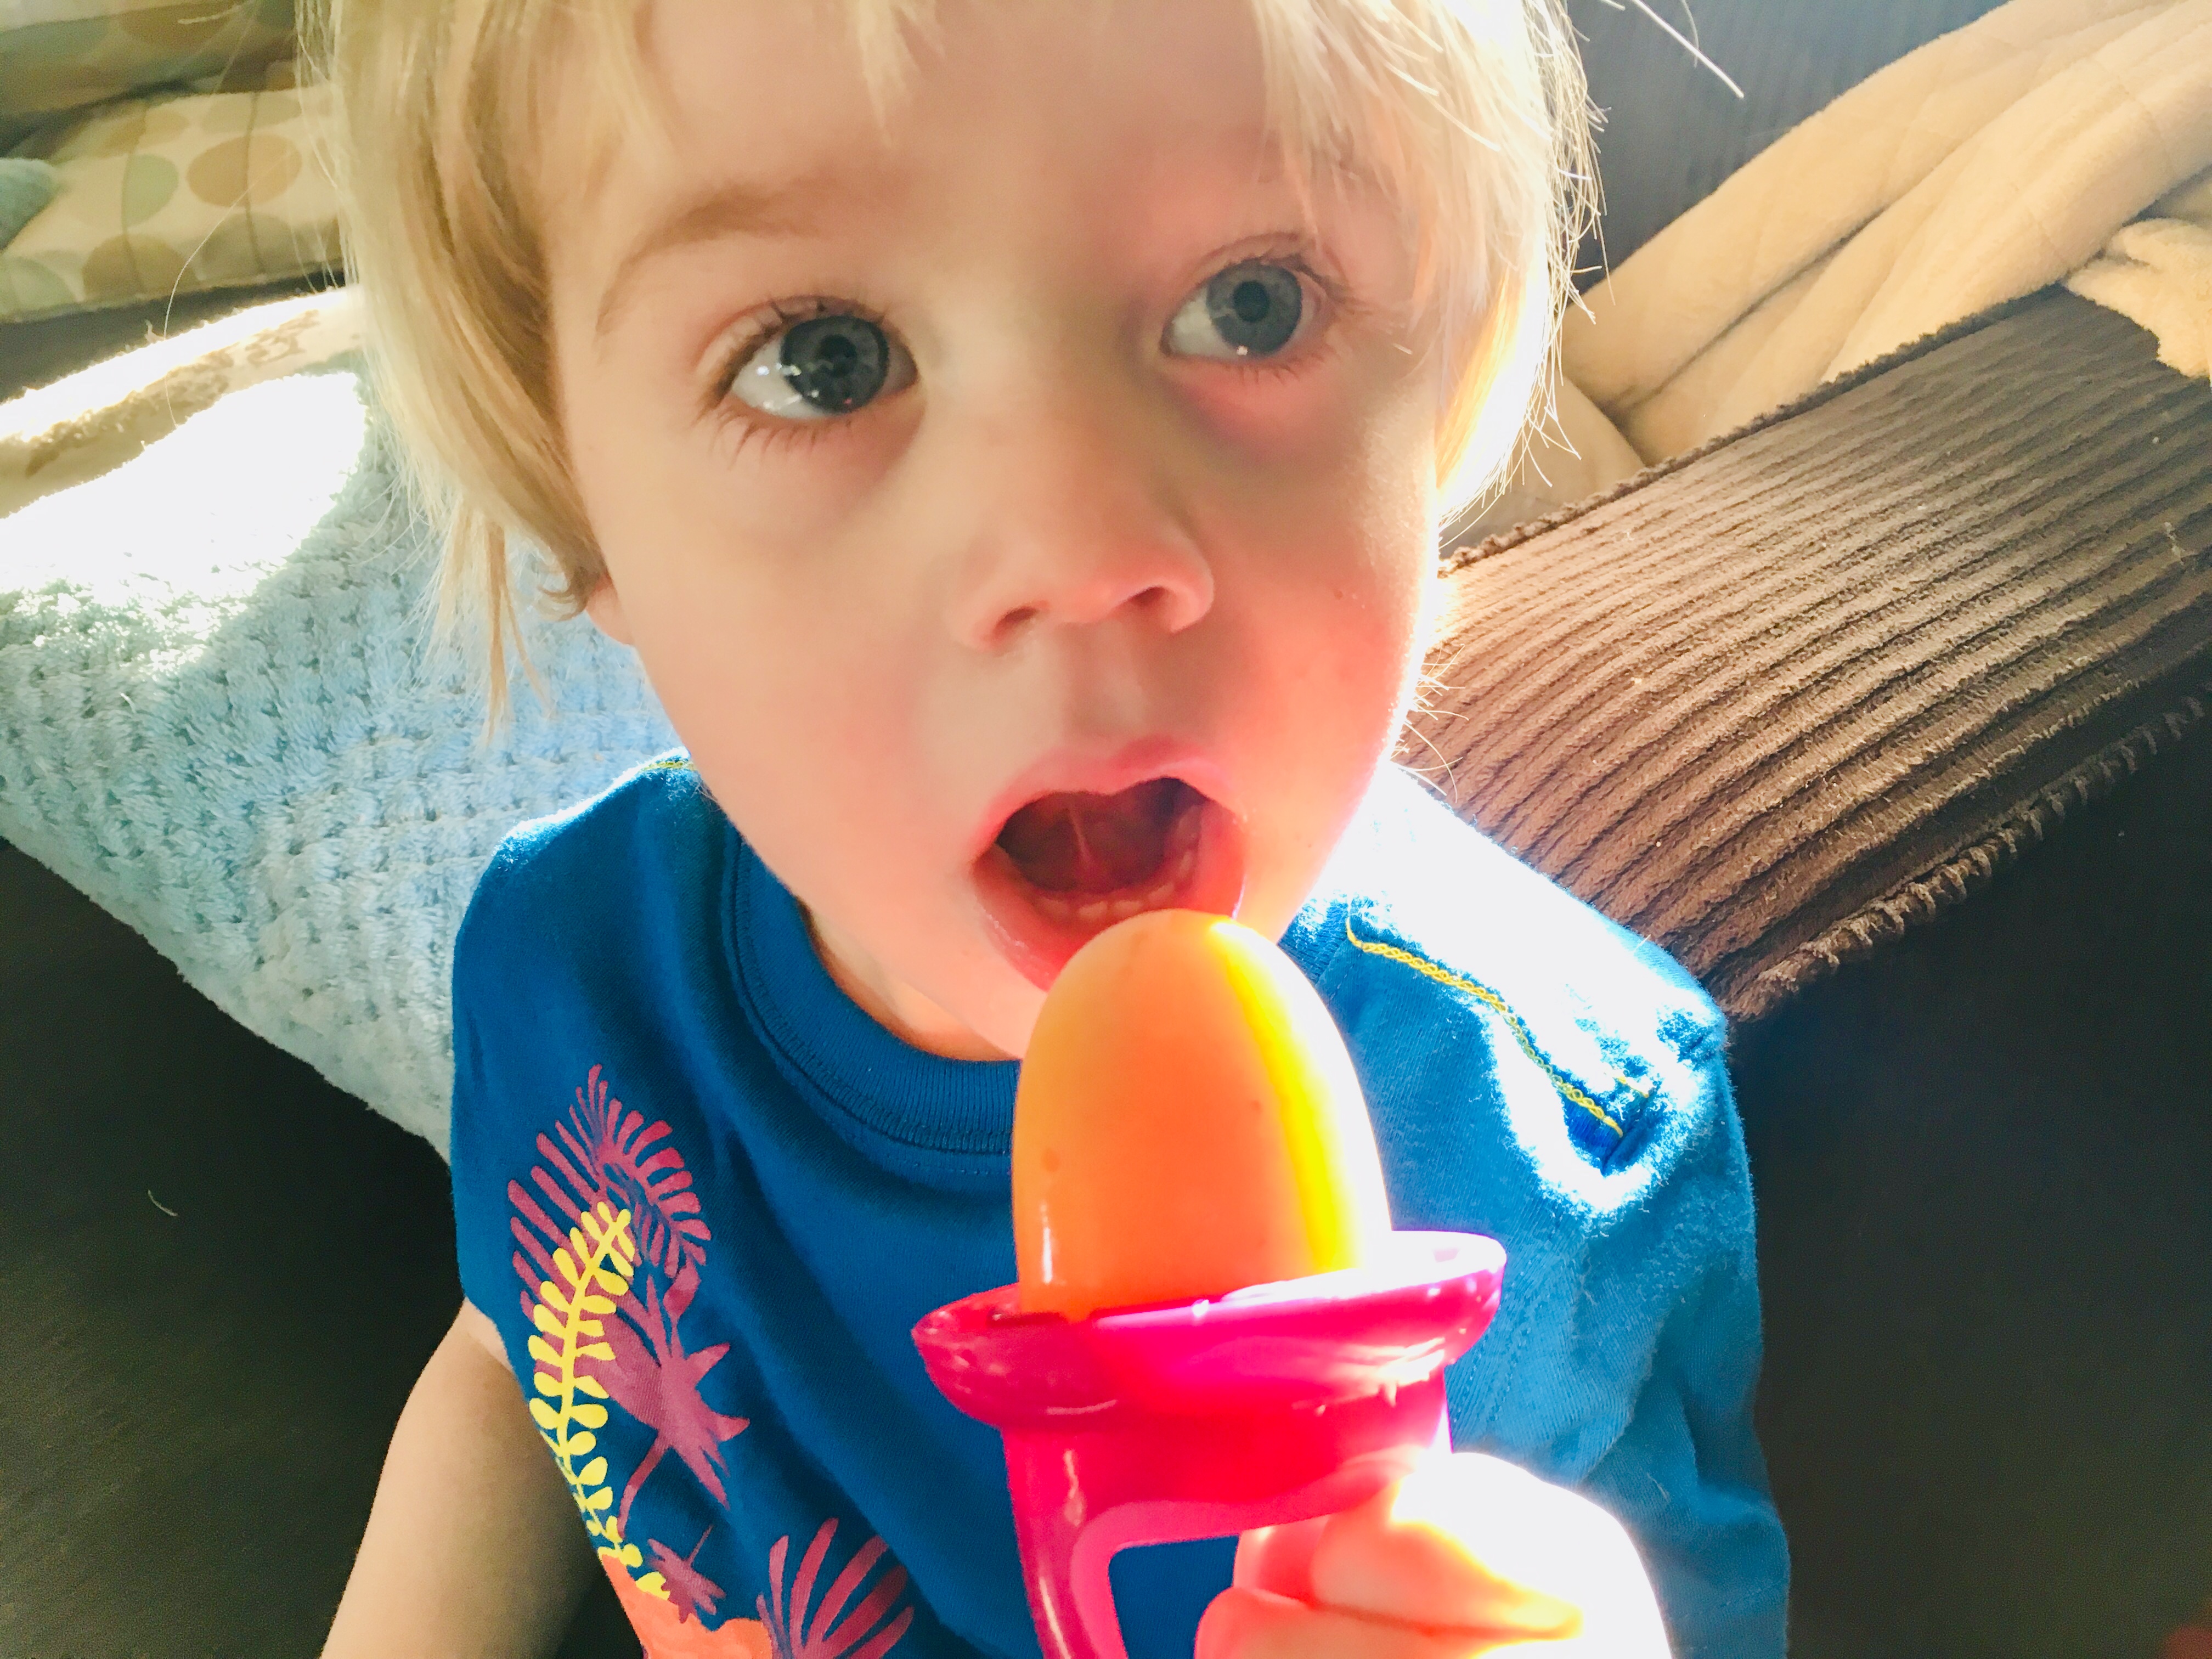 frozen fruit for teething 4 month old